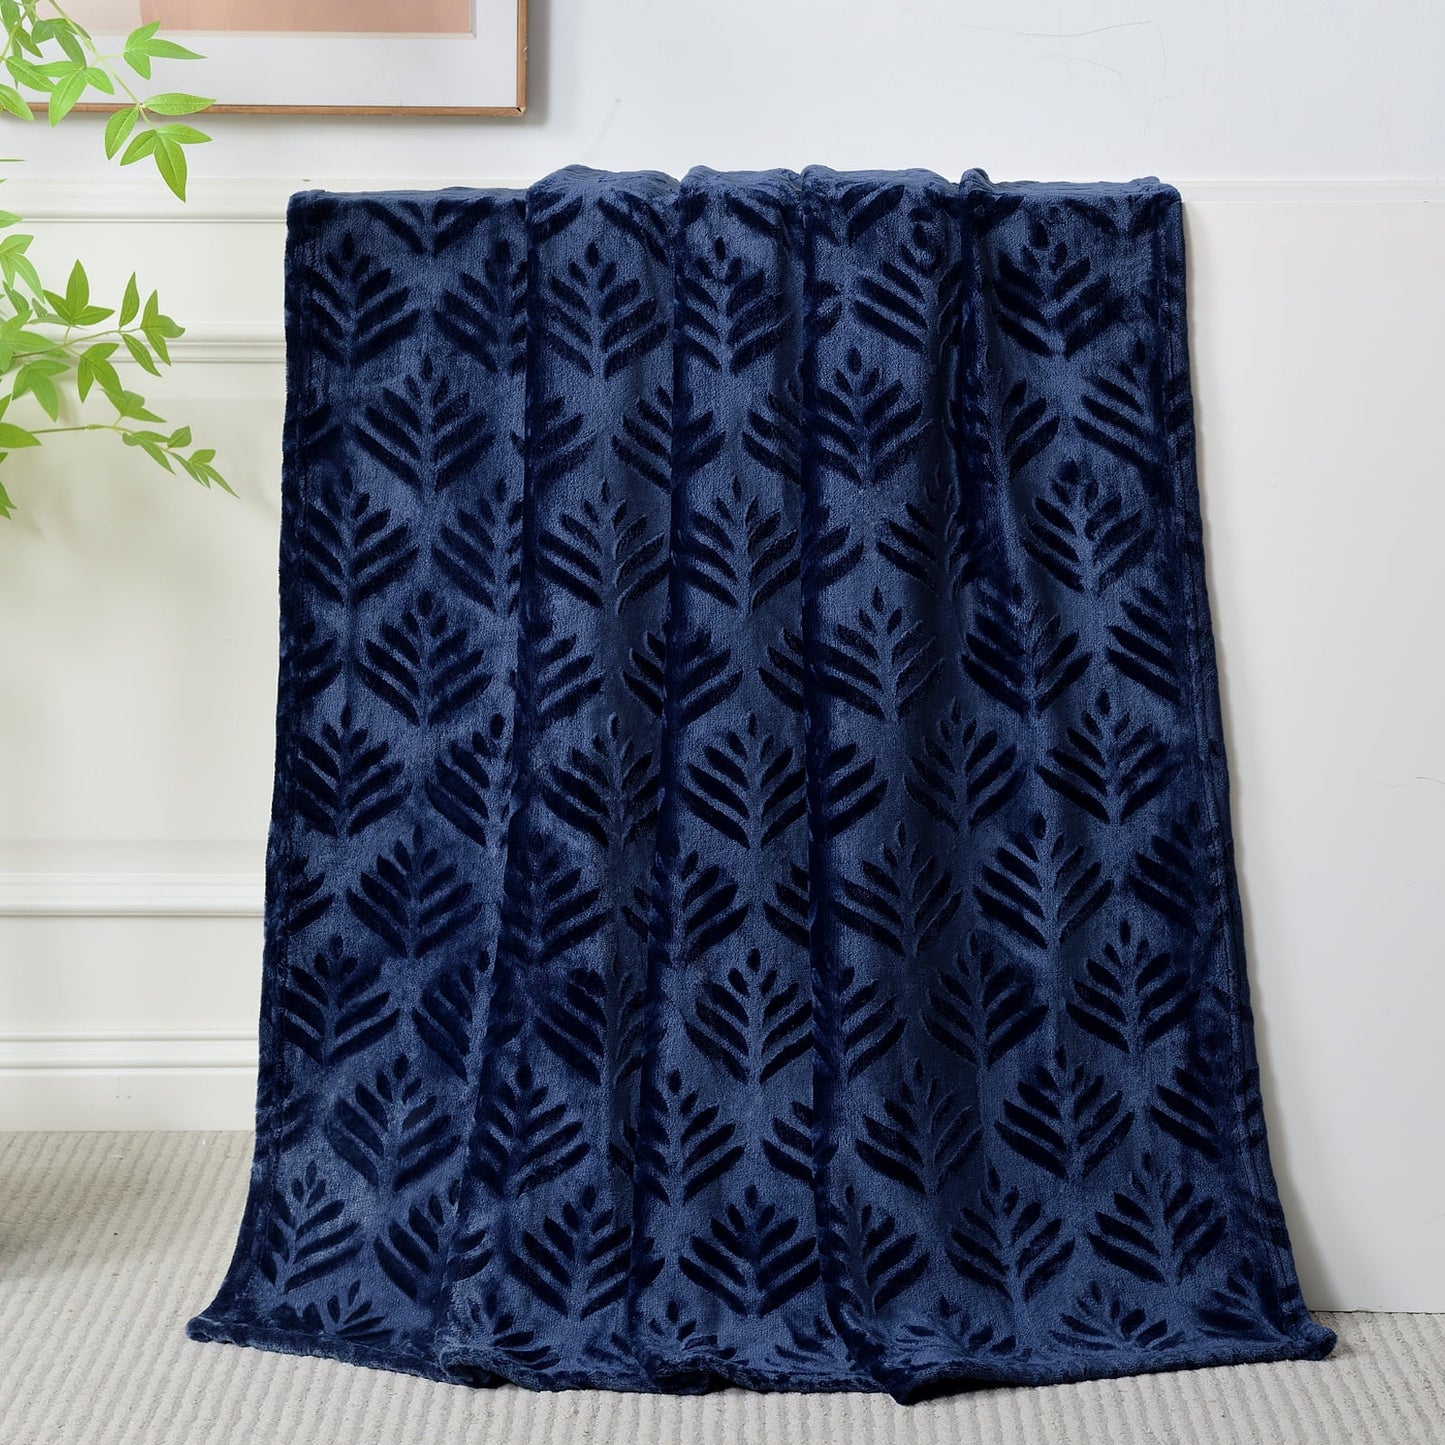 Exclusivo Mezcla Fleece Throw Blanket for Couch, Super Soft and Warm Blankets for All Seasons, Plush Fuzzy and Lightweight Navy Blue throw,50x60 Inch